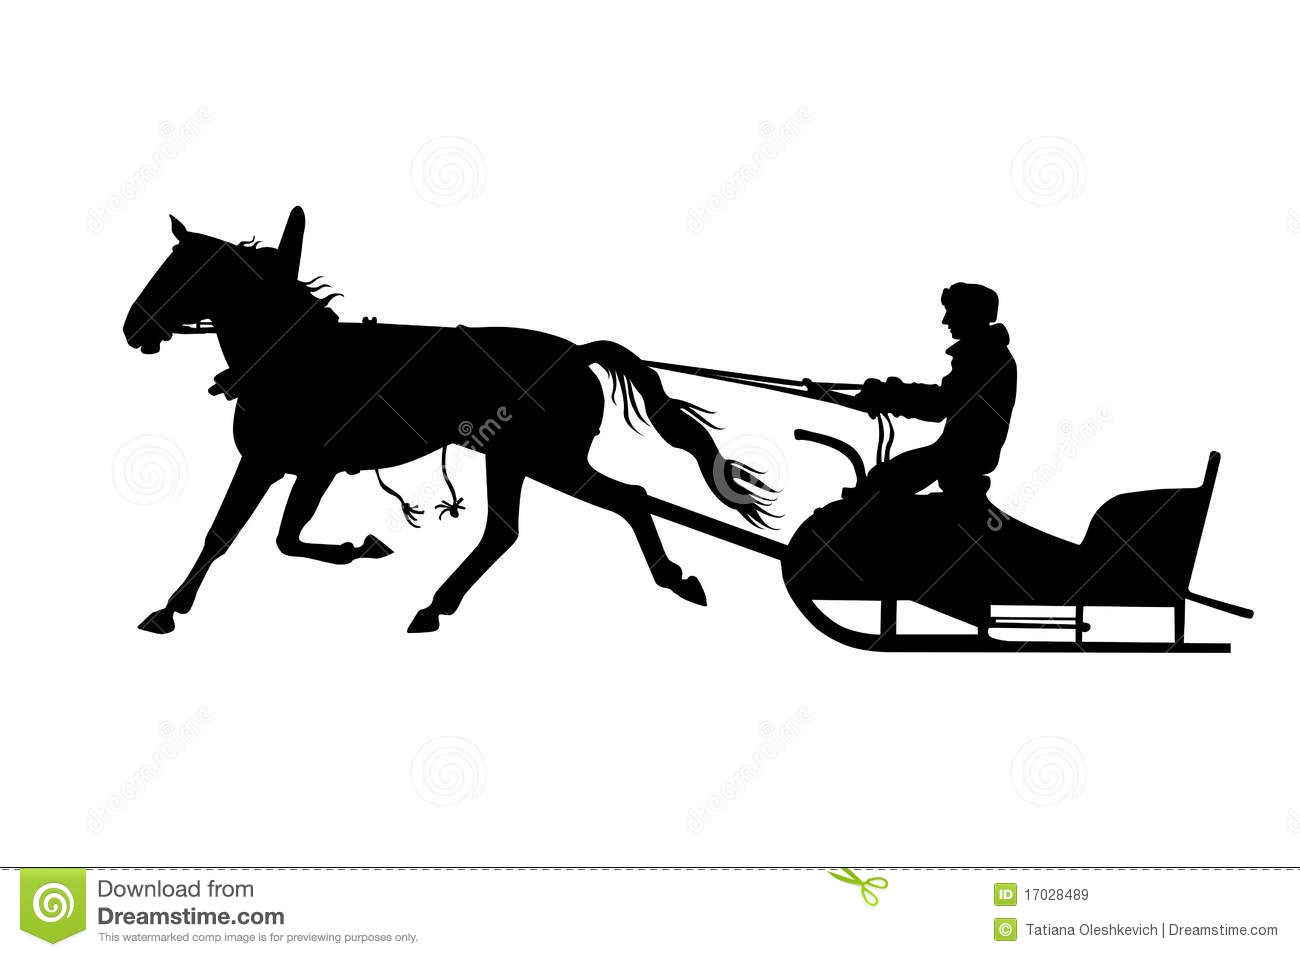 Silhouette Of Man With Horse Drawn Sled Royalty Free Stock Images